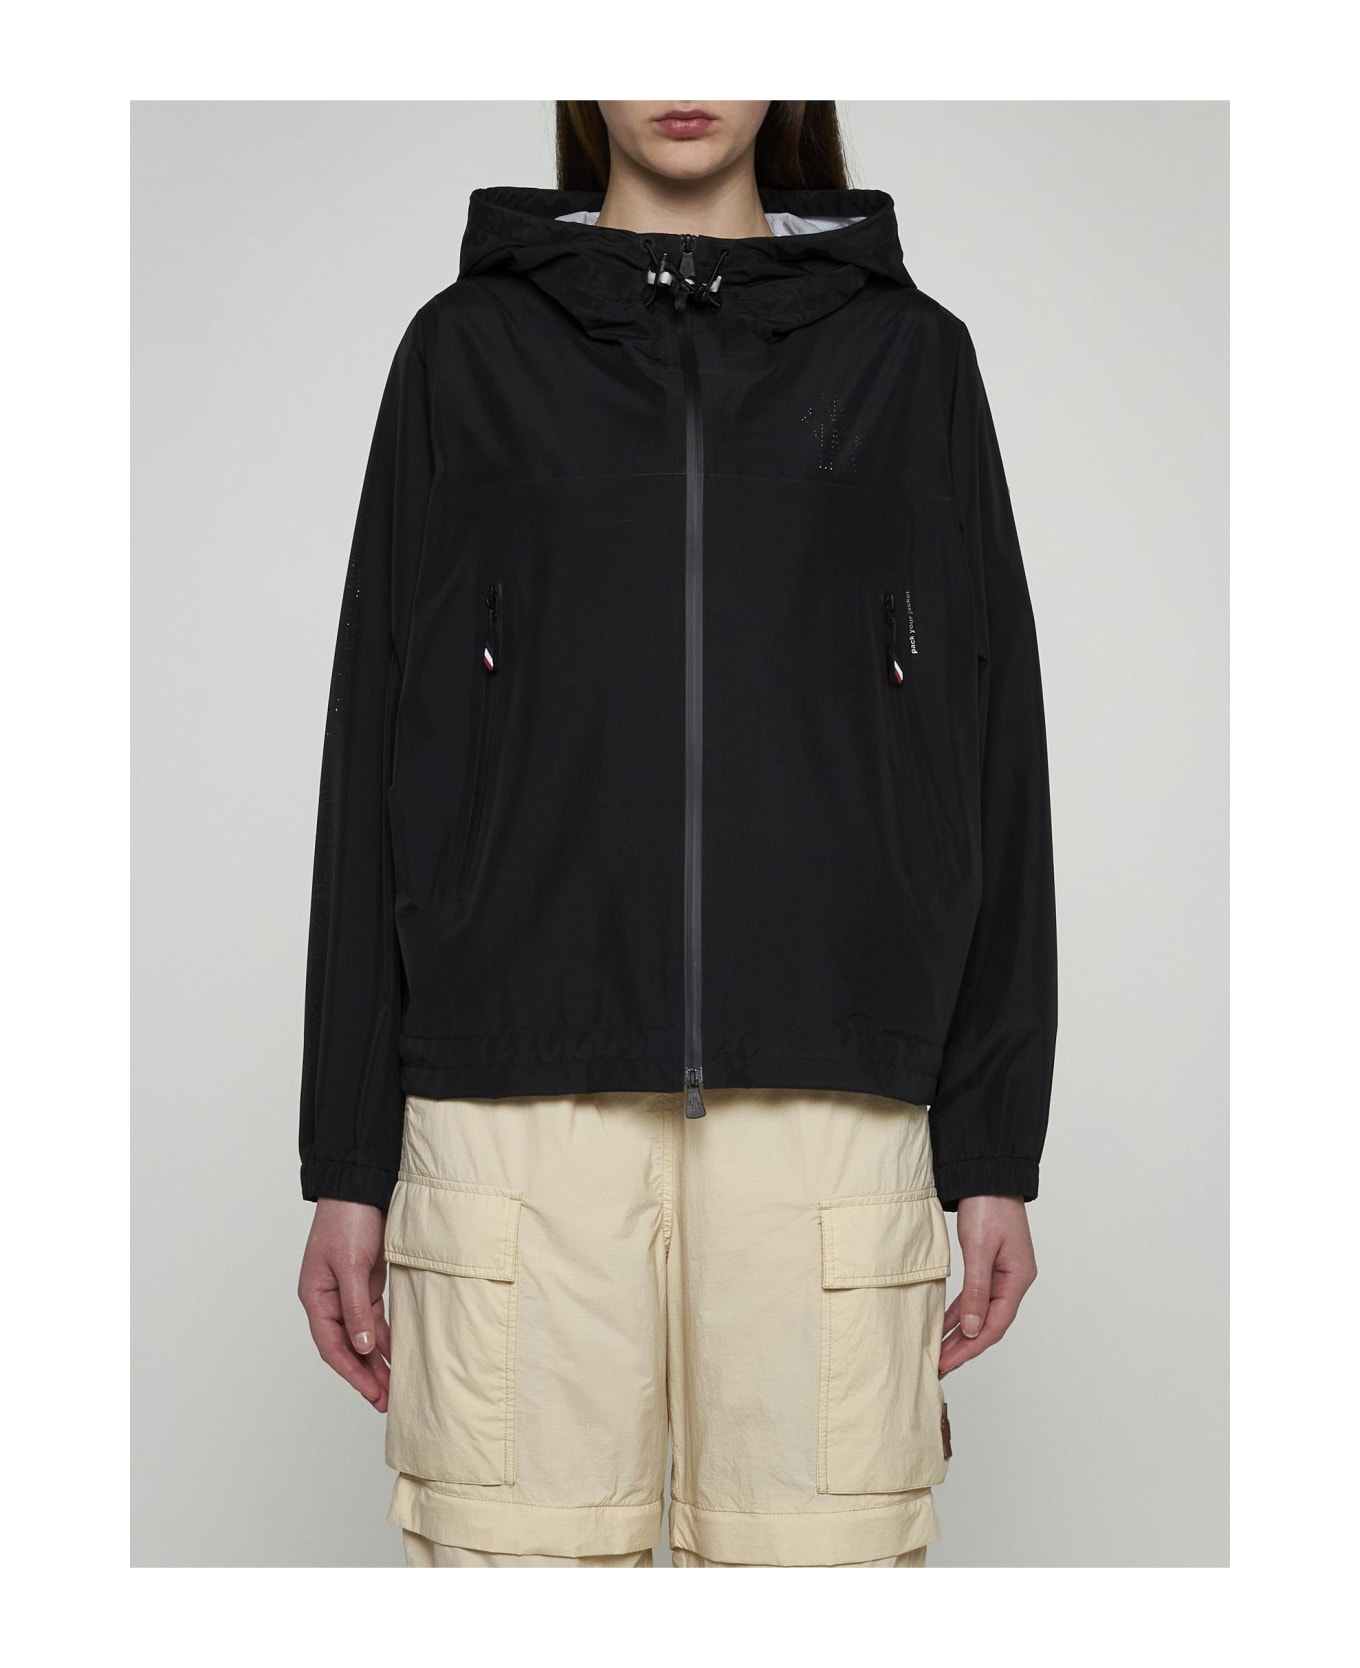 Moncler Grenoble Fanes Technical Fabric Jacket